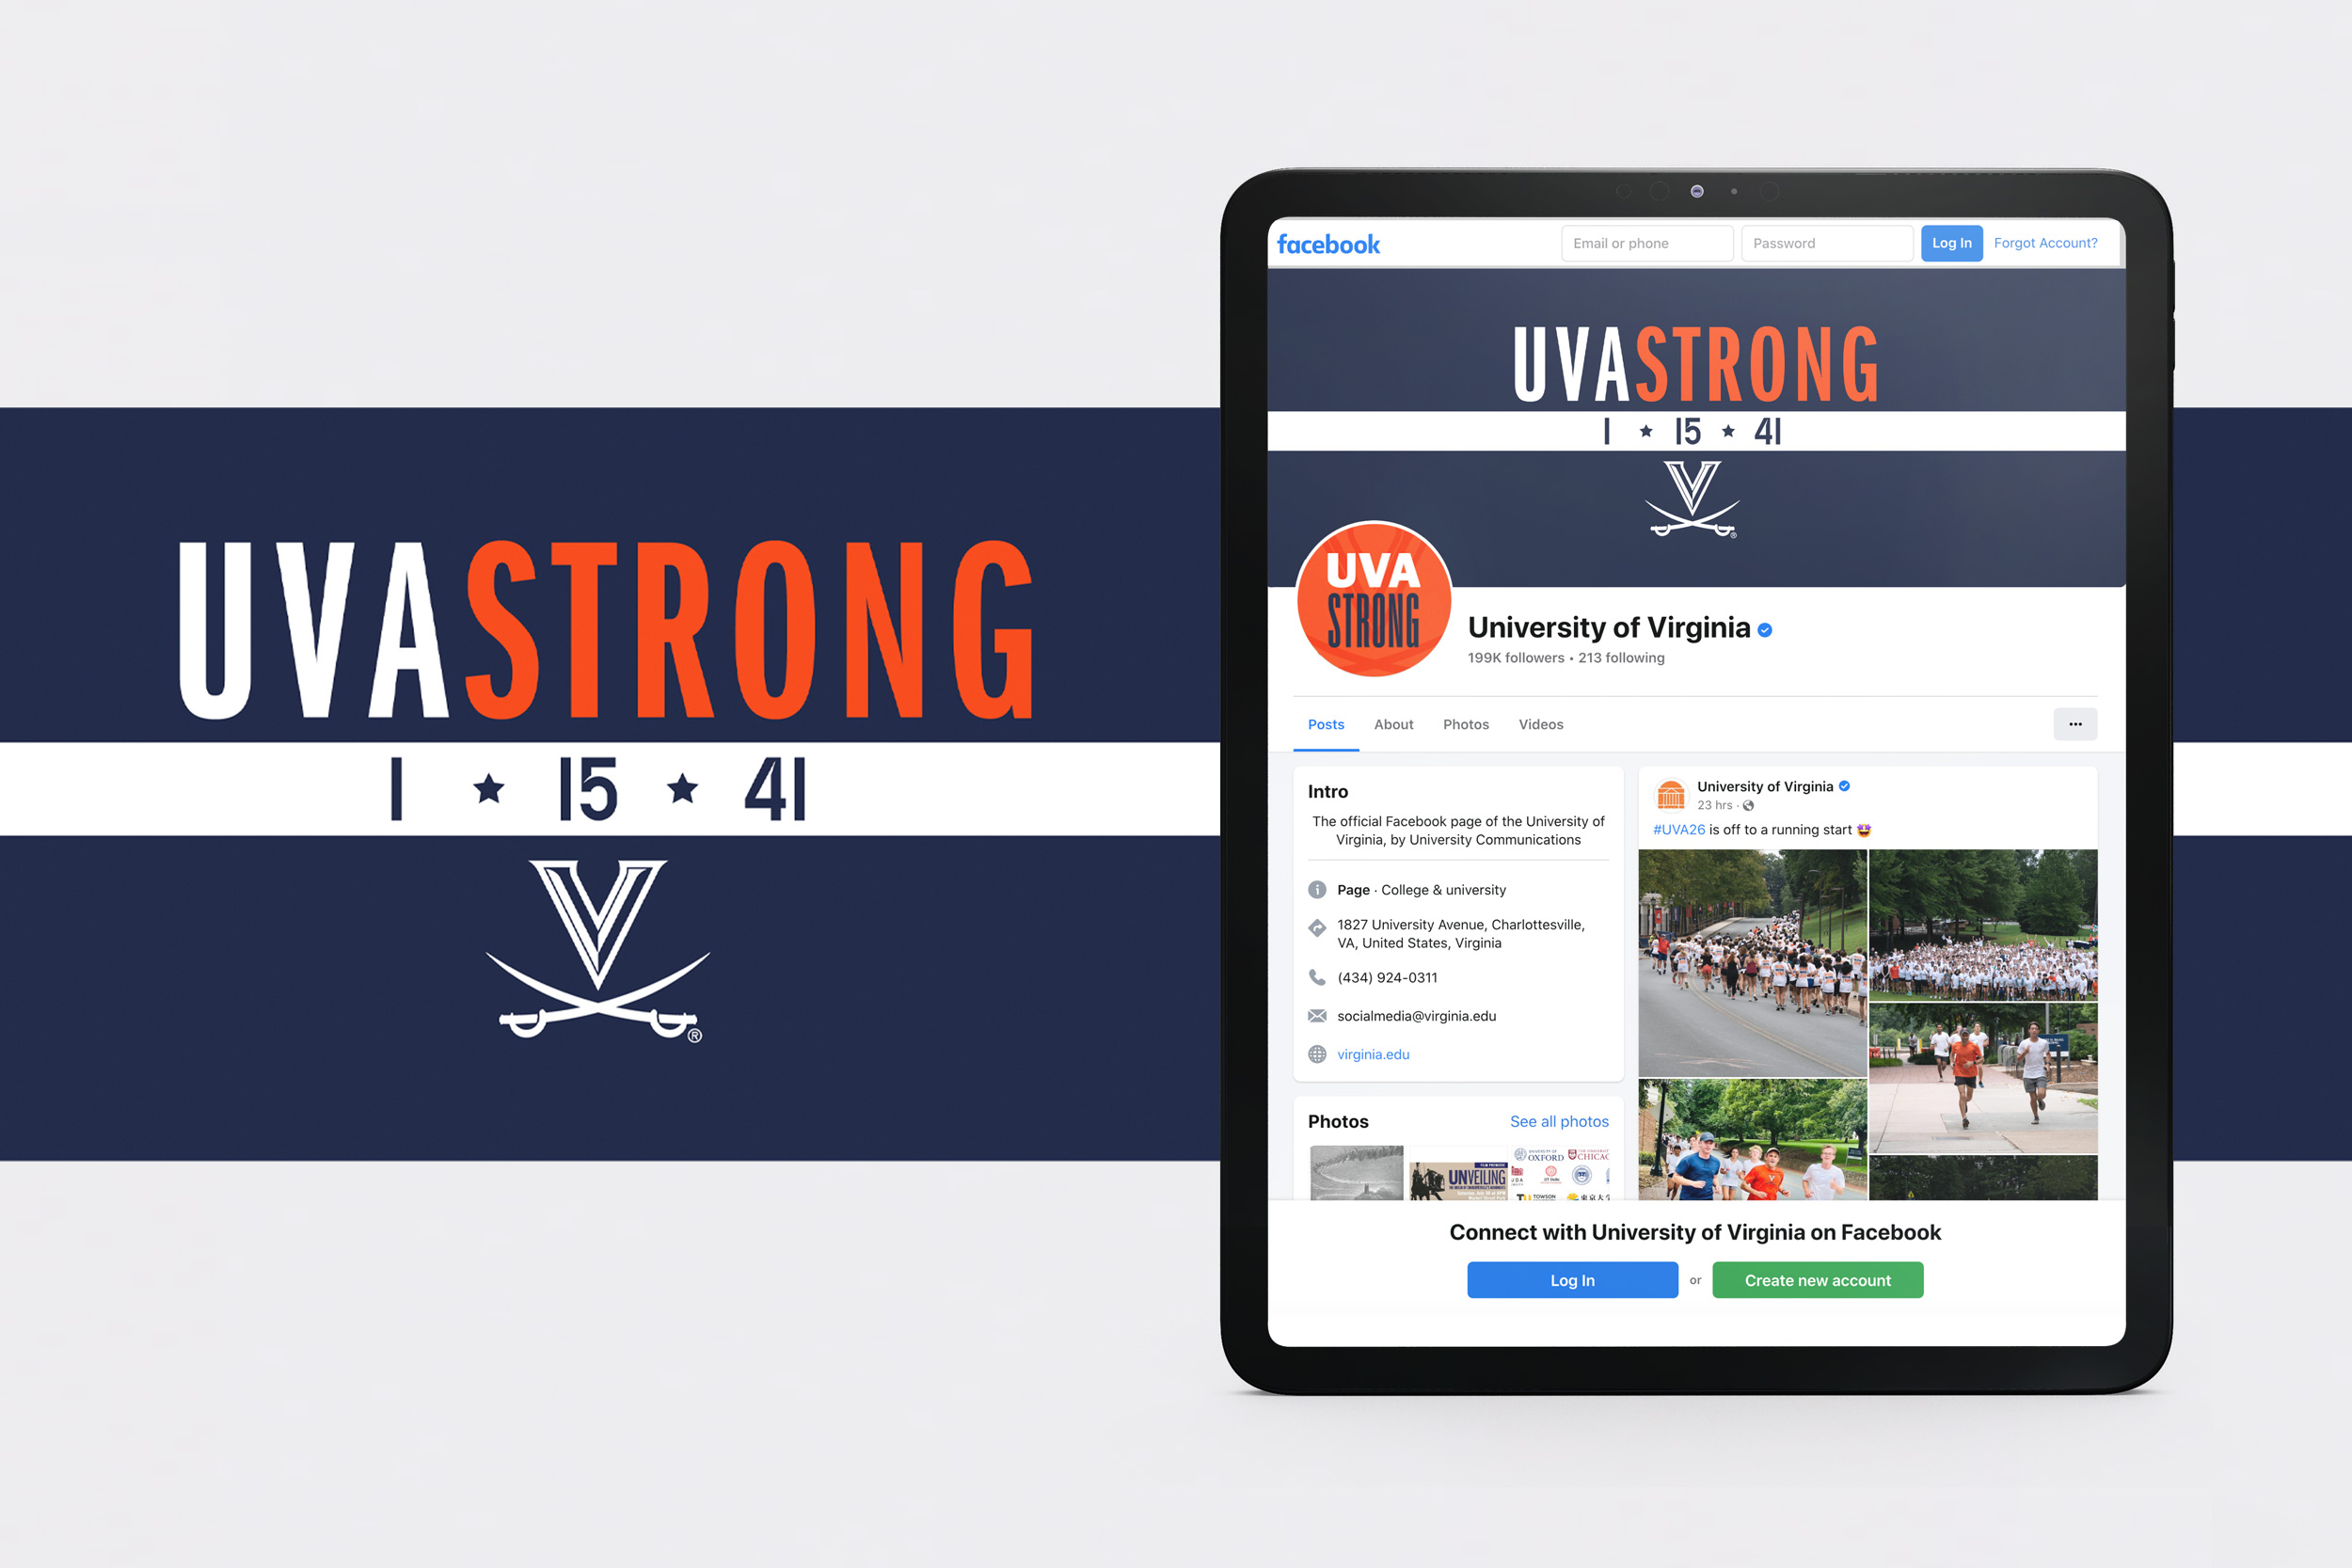 UVA Strong on the UVA Facebook page